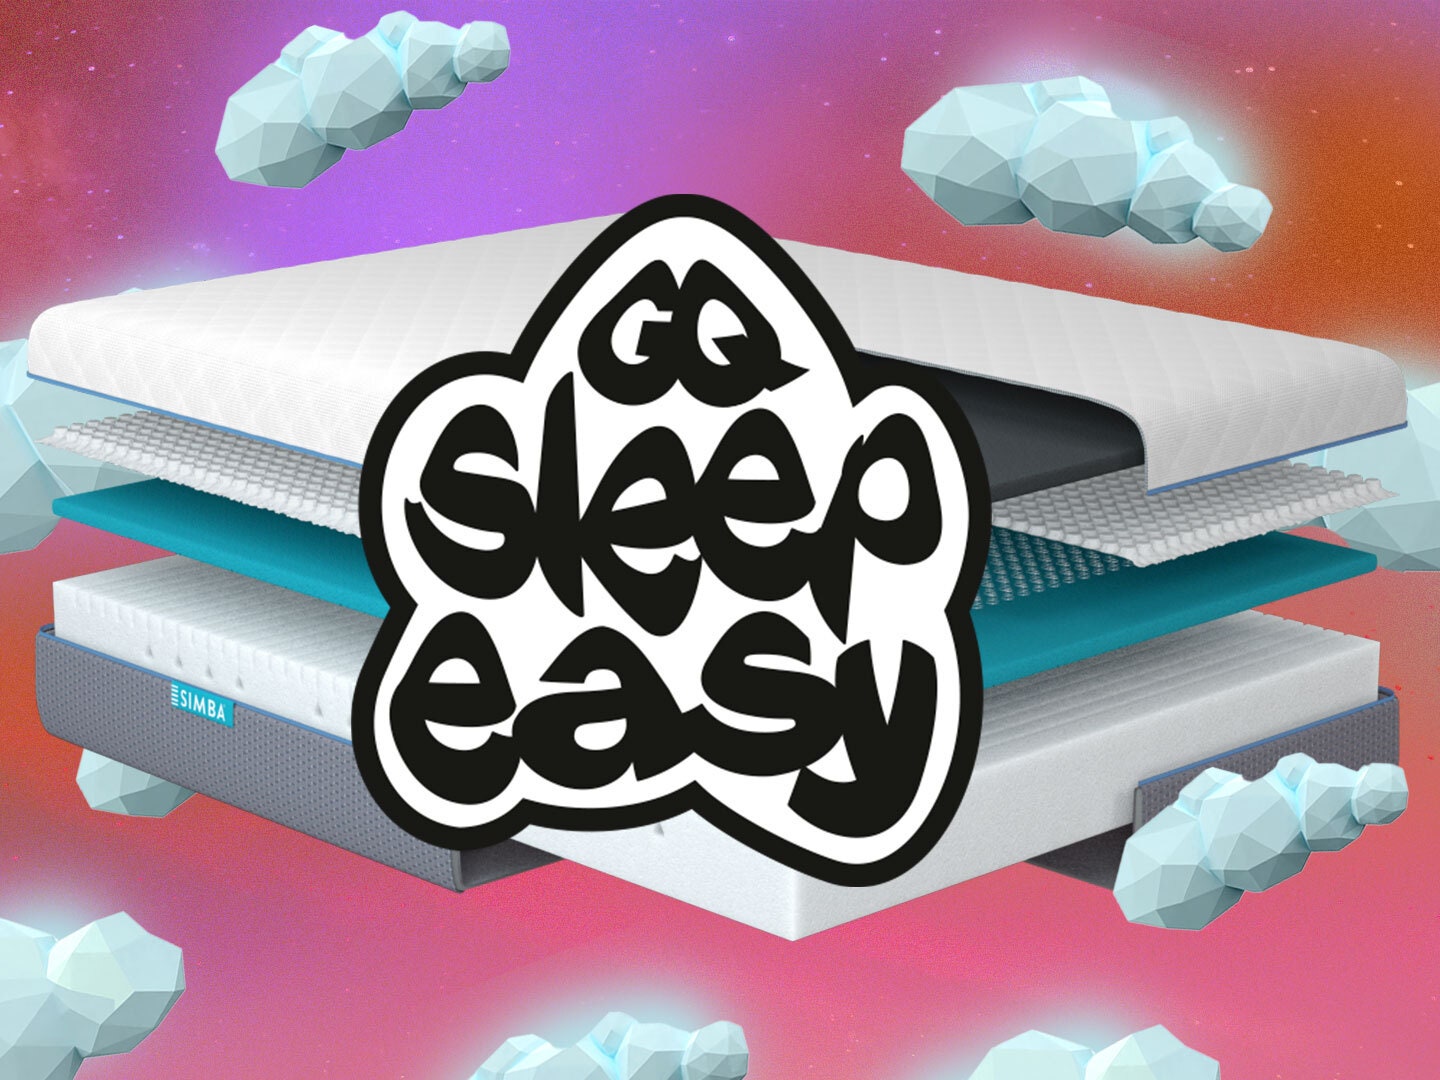 The best mattress to buy now for a better night’s sleep